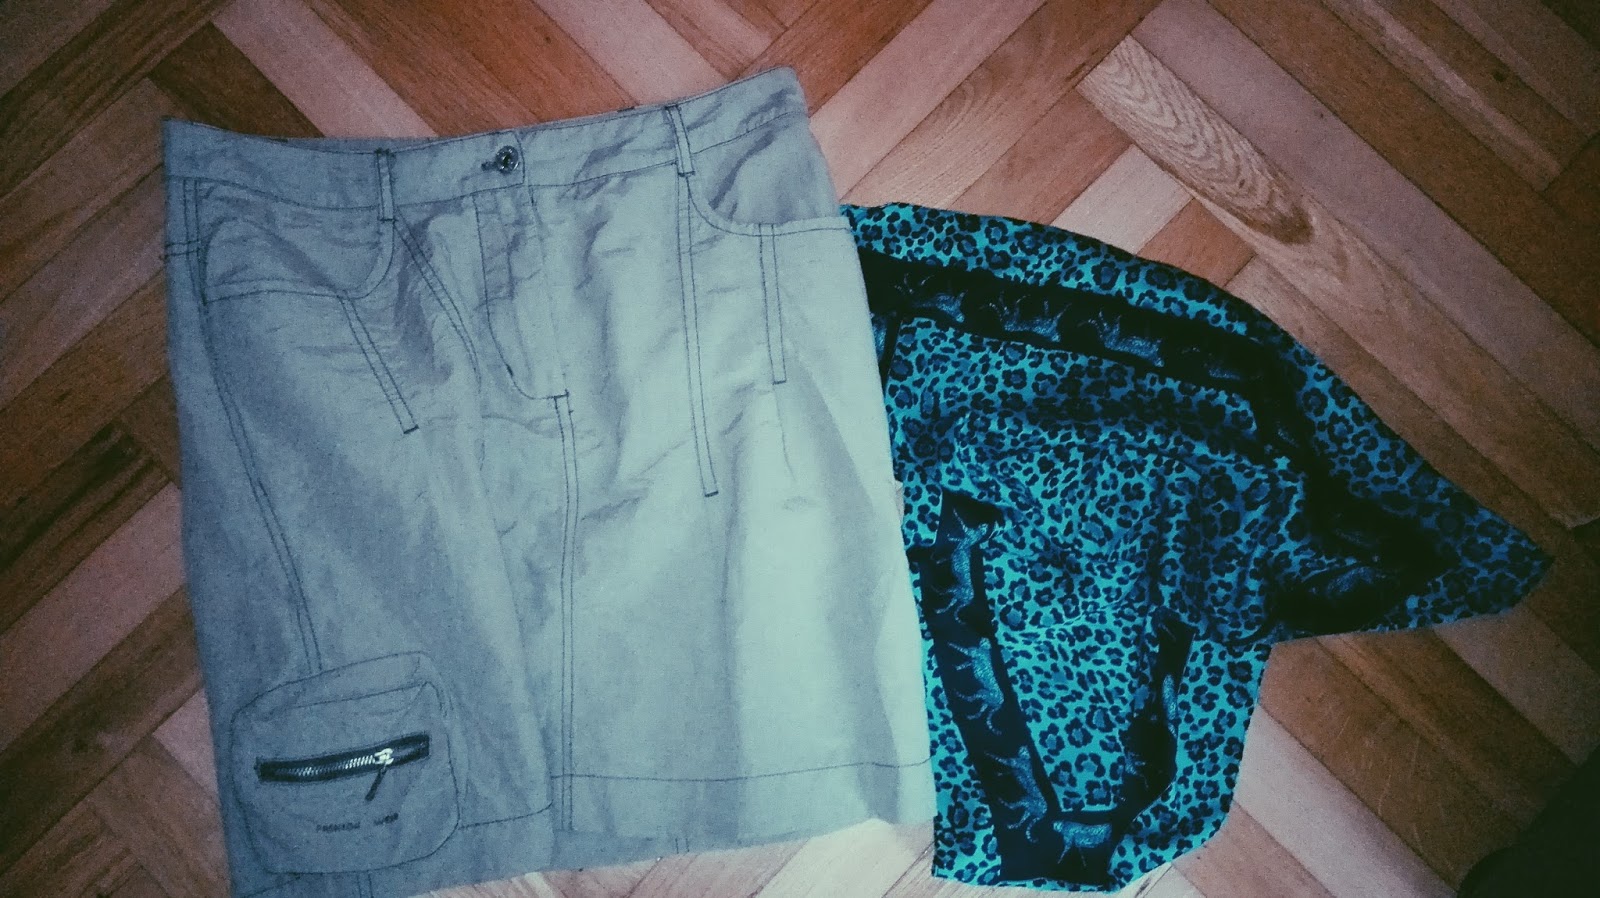 MINI HAUL : KHAKI SKIRT AND TURQUOISE SCARFIN PANTHER